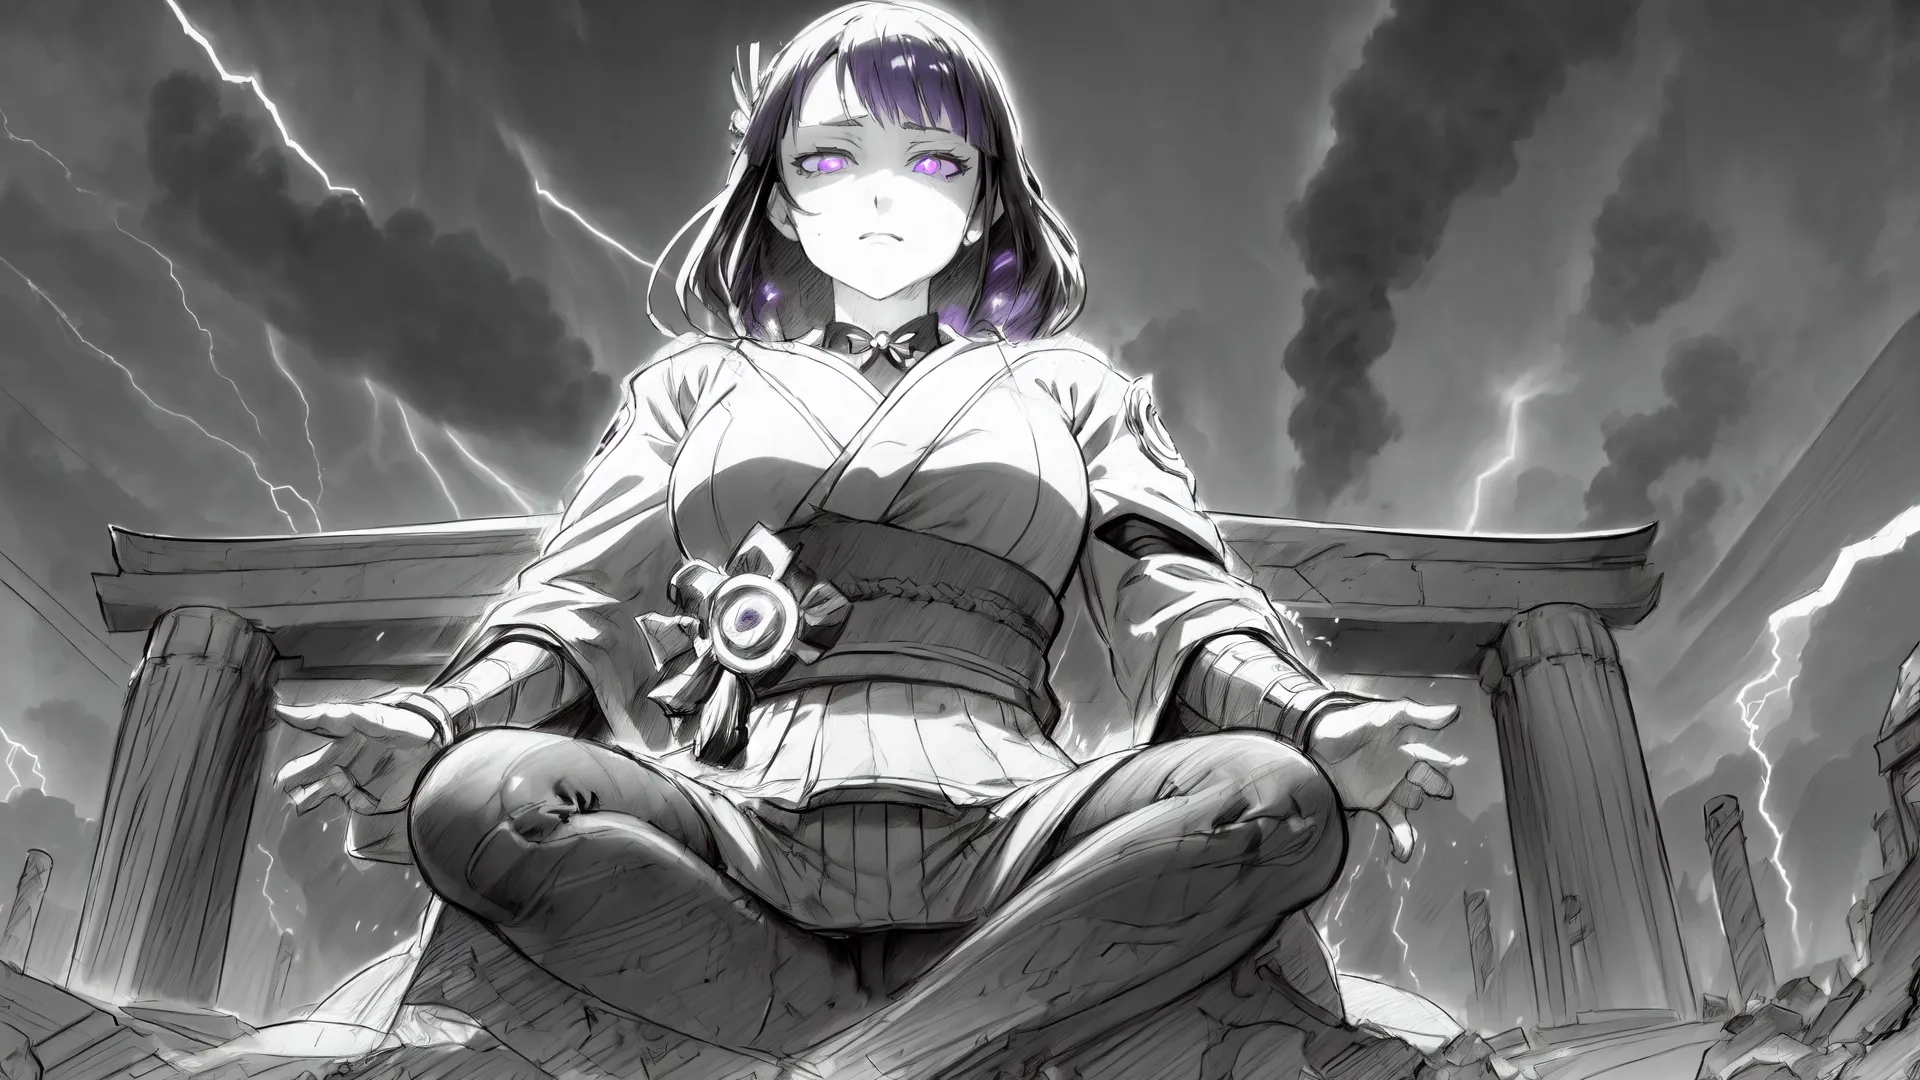 a woman sitting in the middle of a stone bench with lightnings above her and buildings in the background behind her are clouds of smoke and some kind of rain
